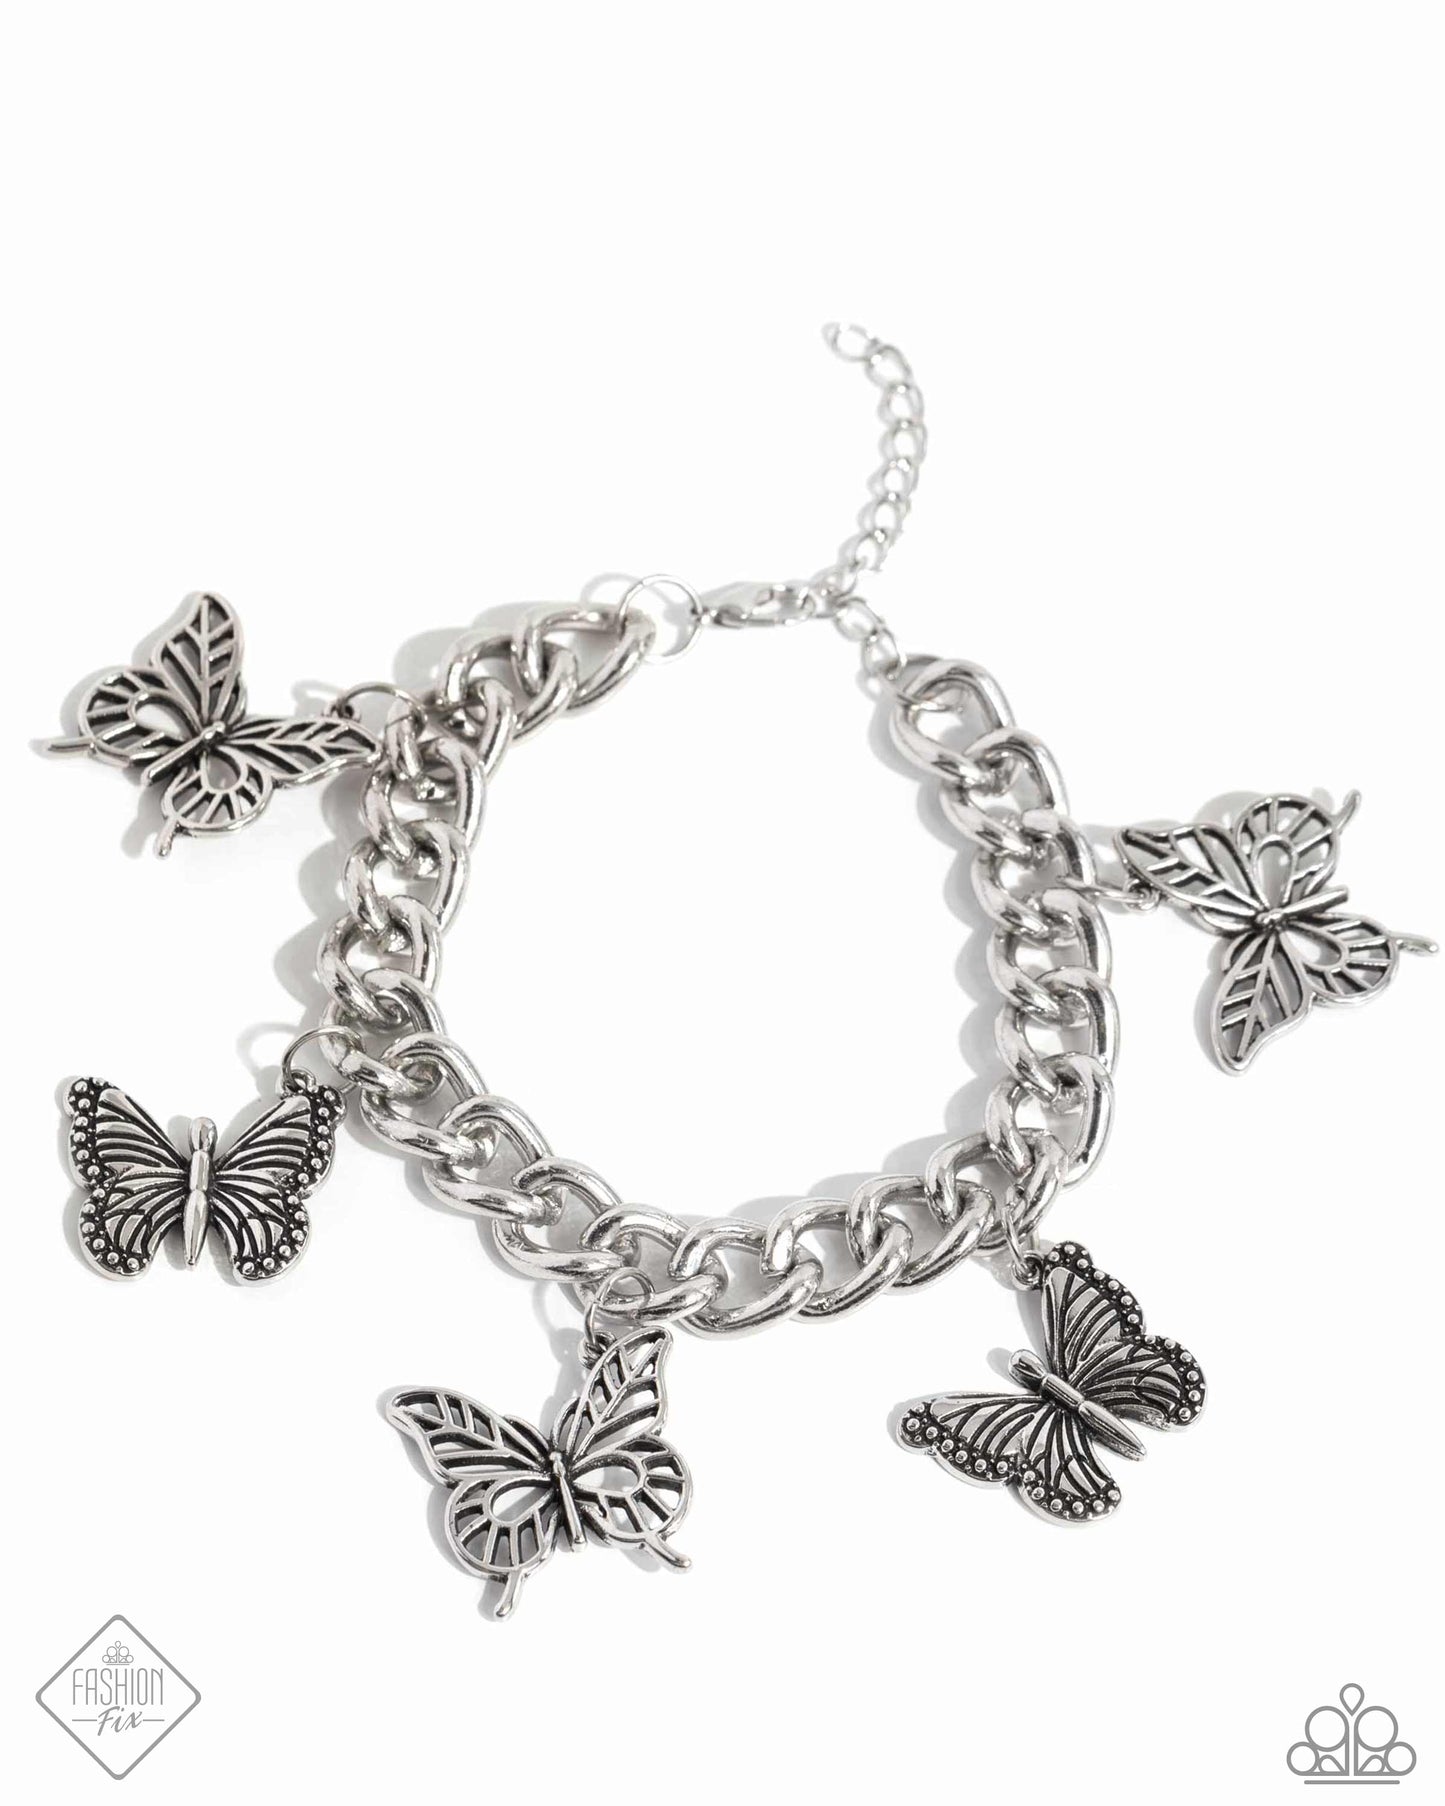 Aerial Ambience Silver Butterfly Clasp Bracelet - Paparazzi Accessories